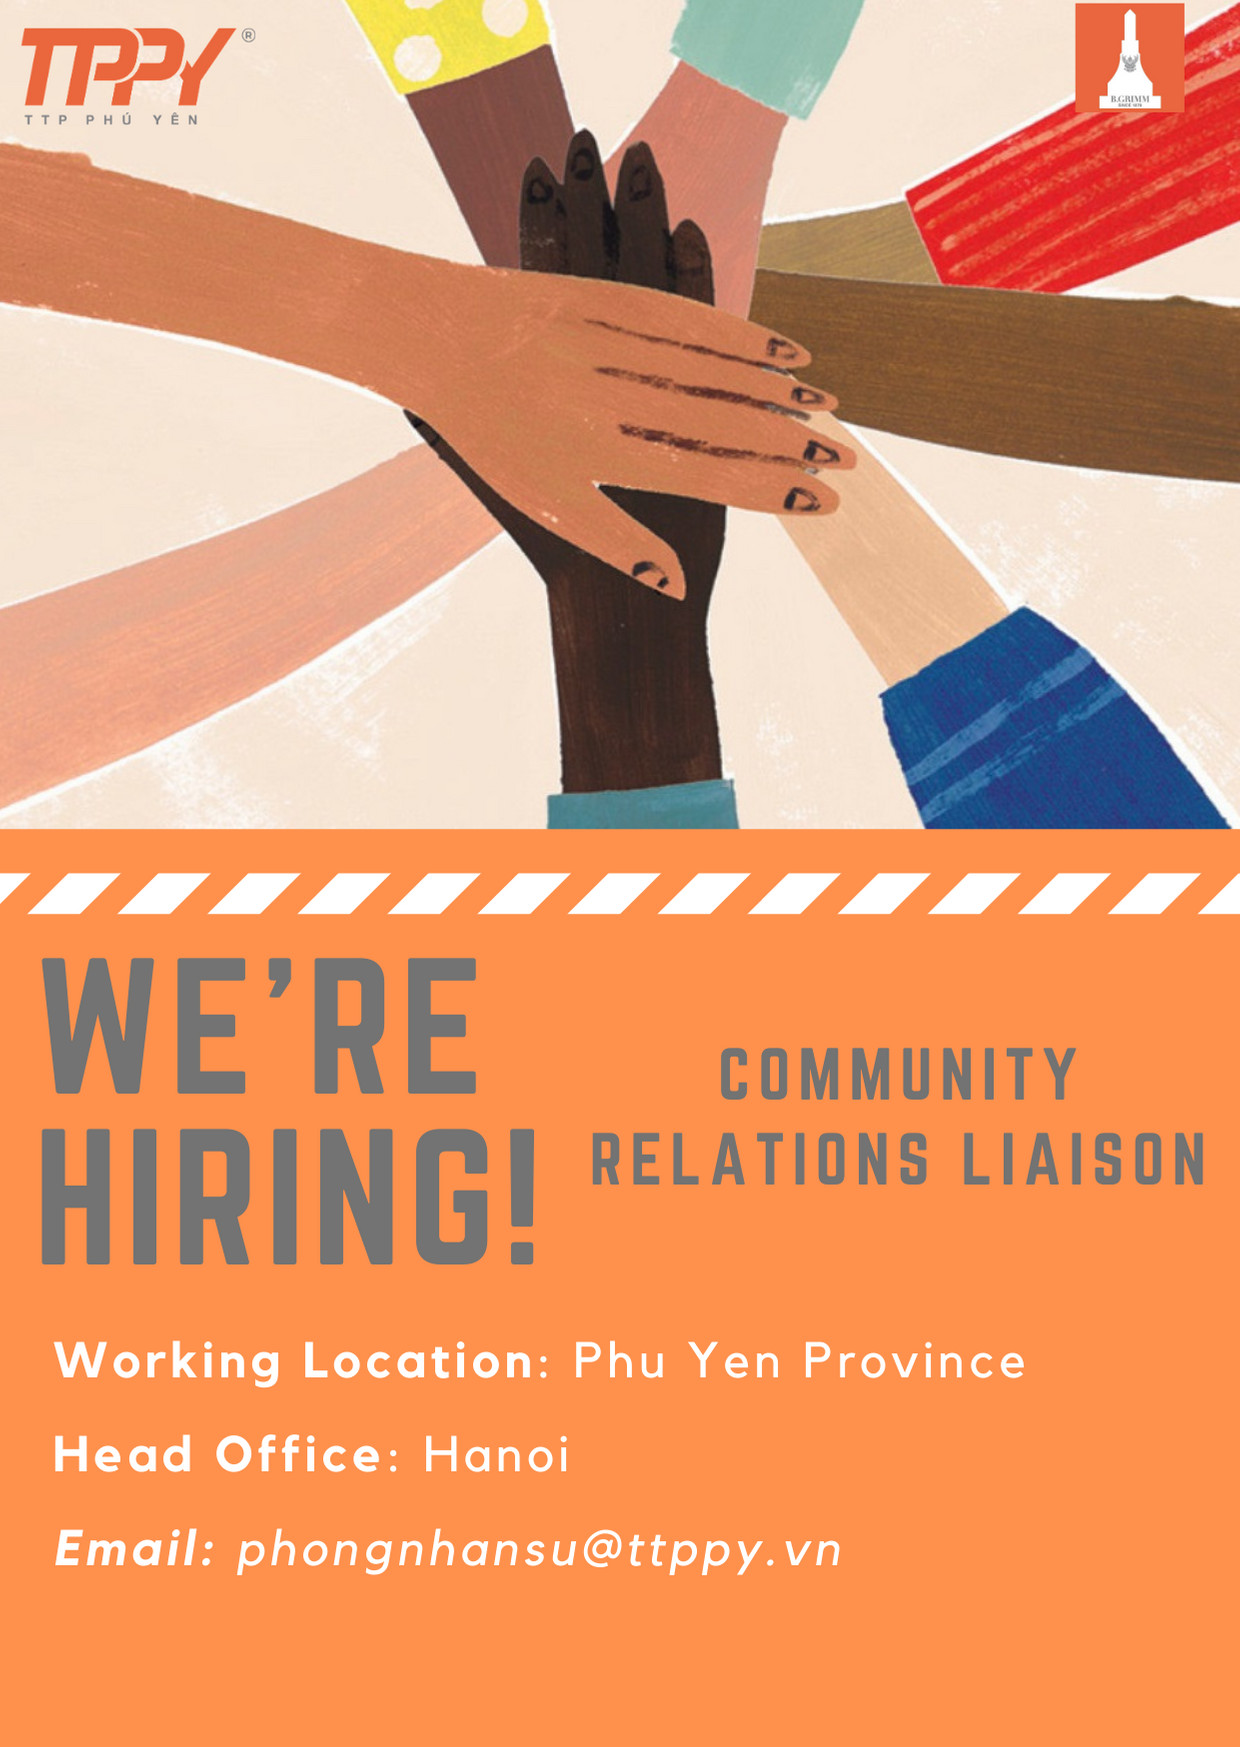 We are hiring Community Relations Liaison